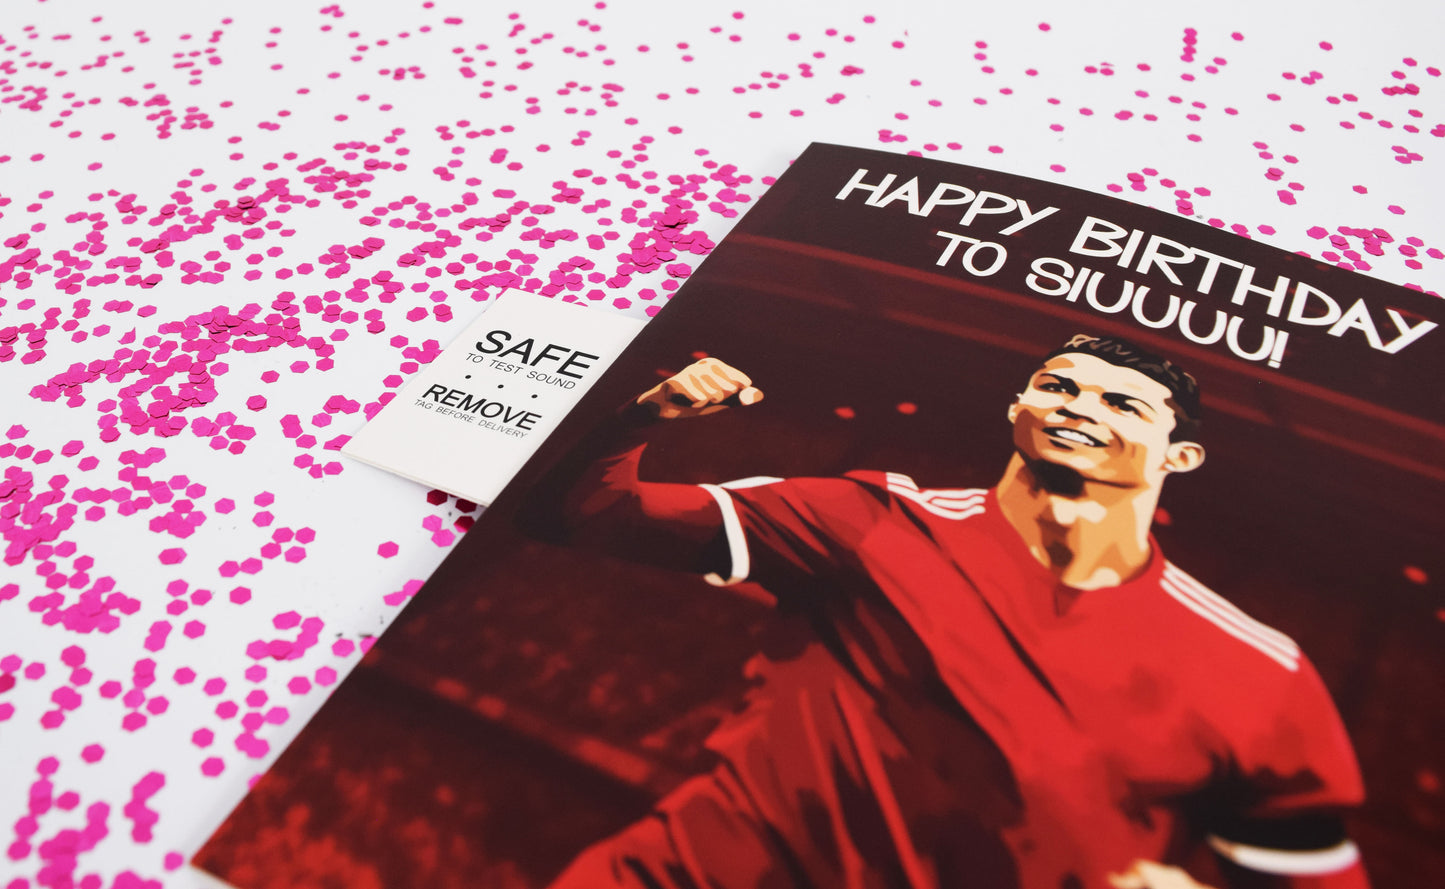 The Manchester CR7 Never-Ending Birthday Card Prank plays RIVALS Song + Glitter